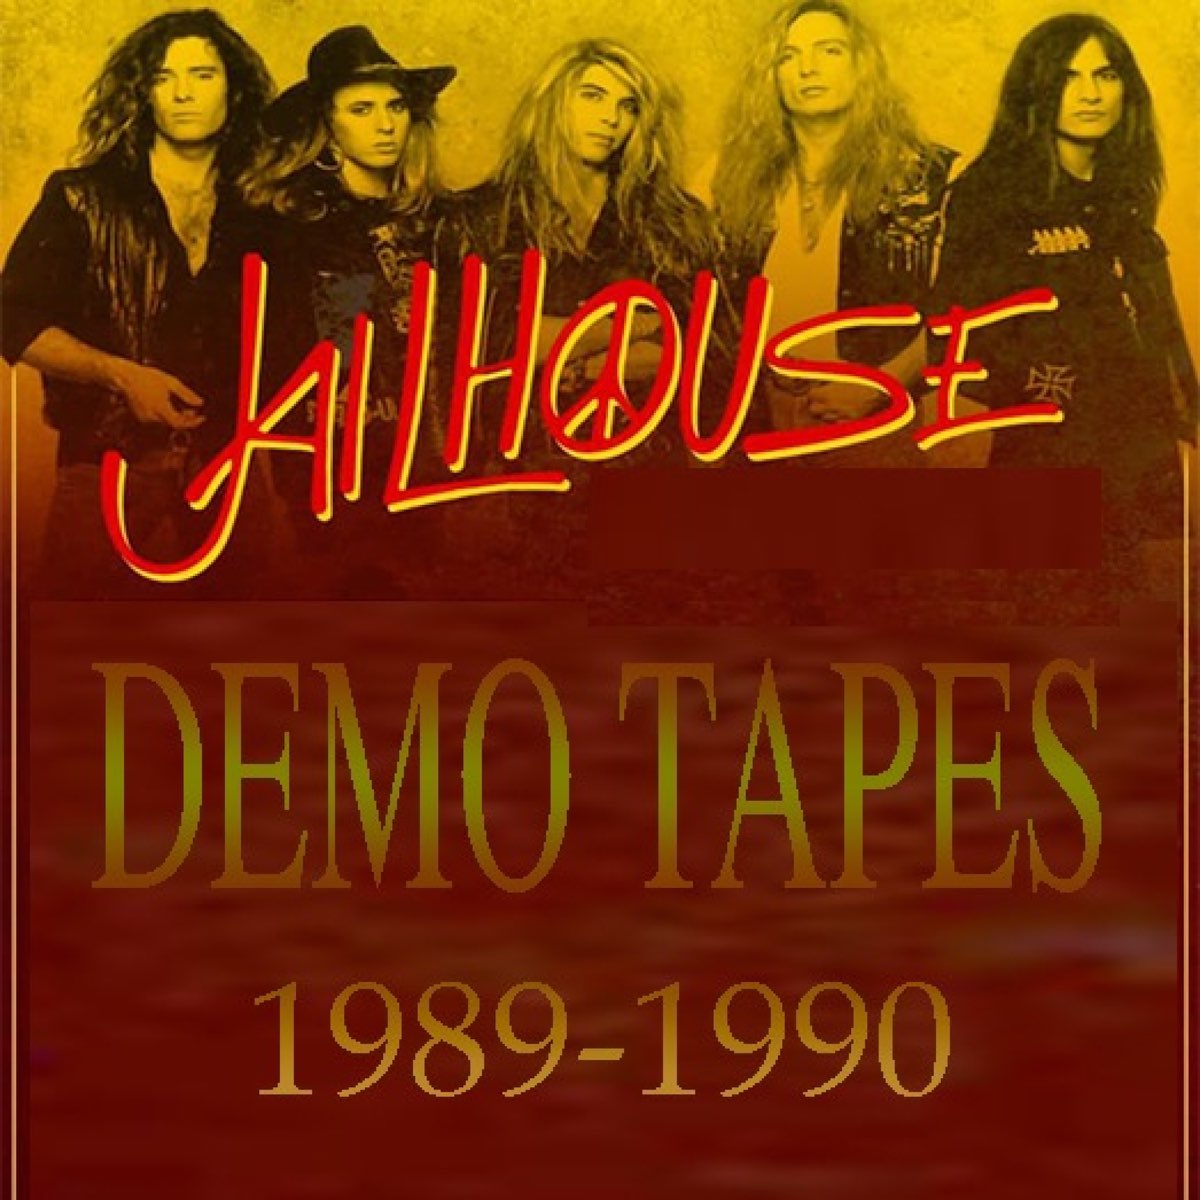 Demo tapes